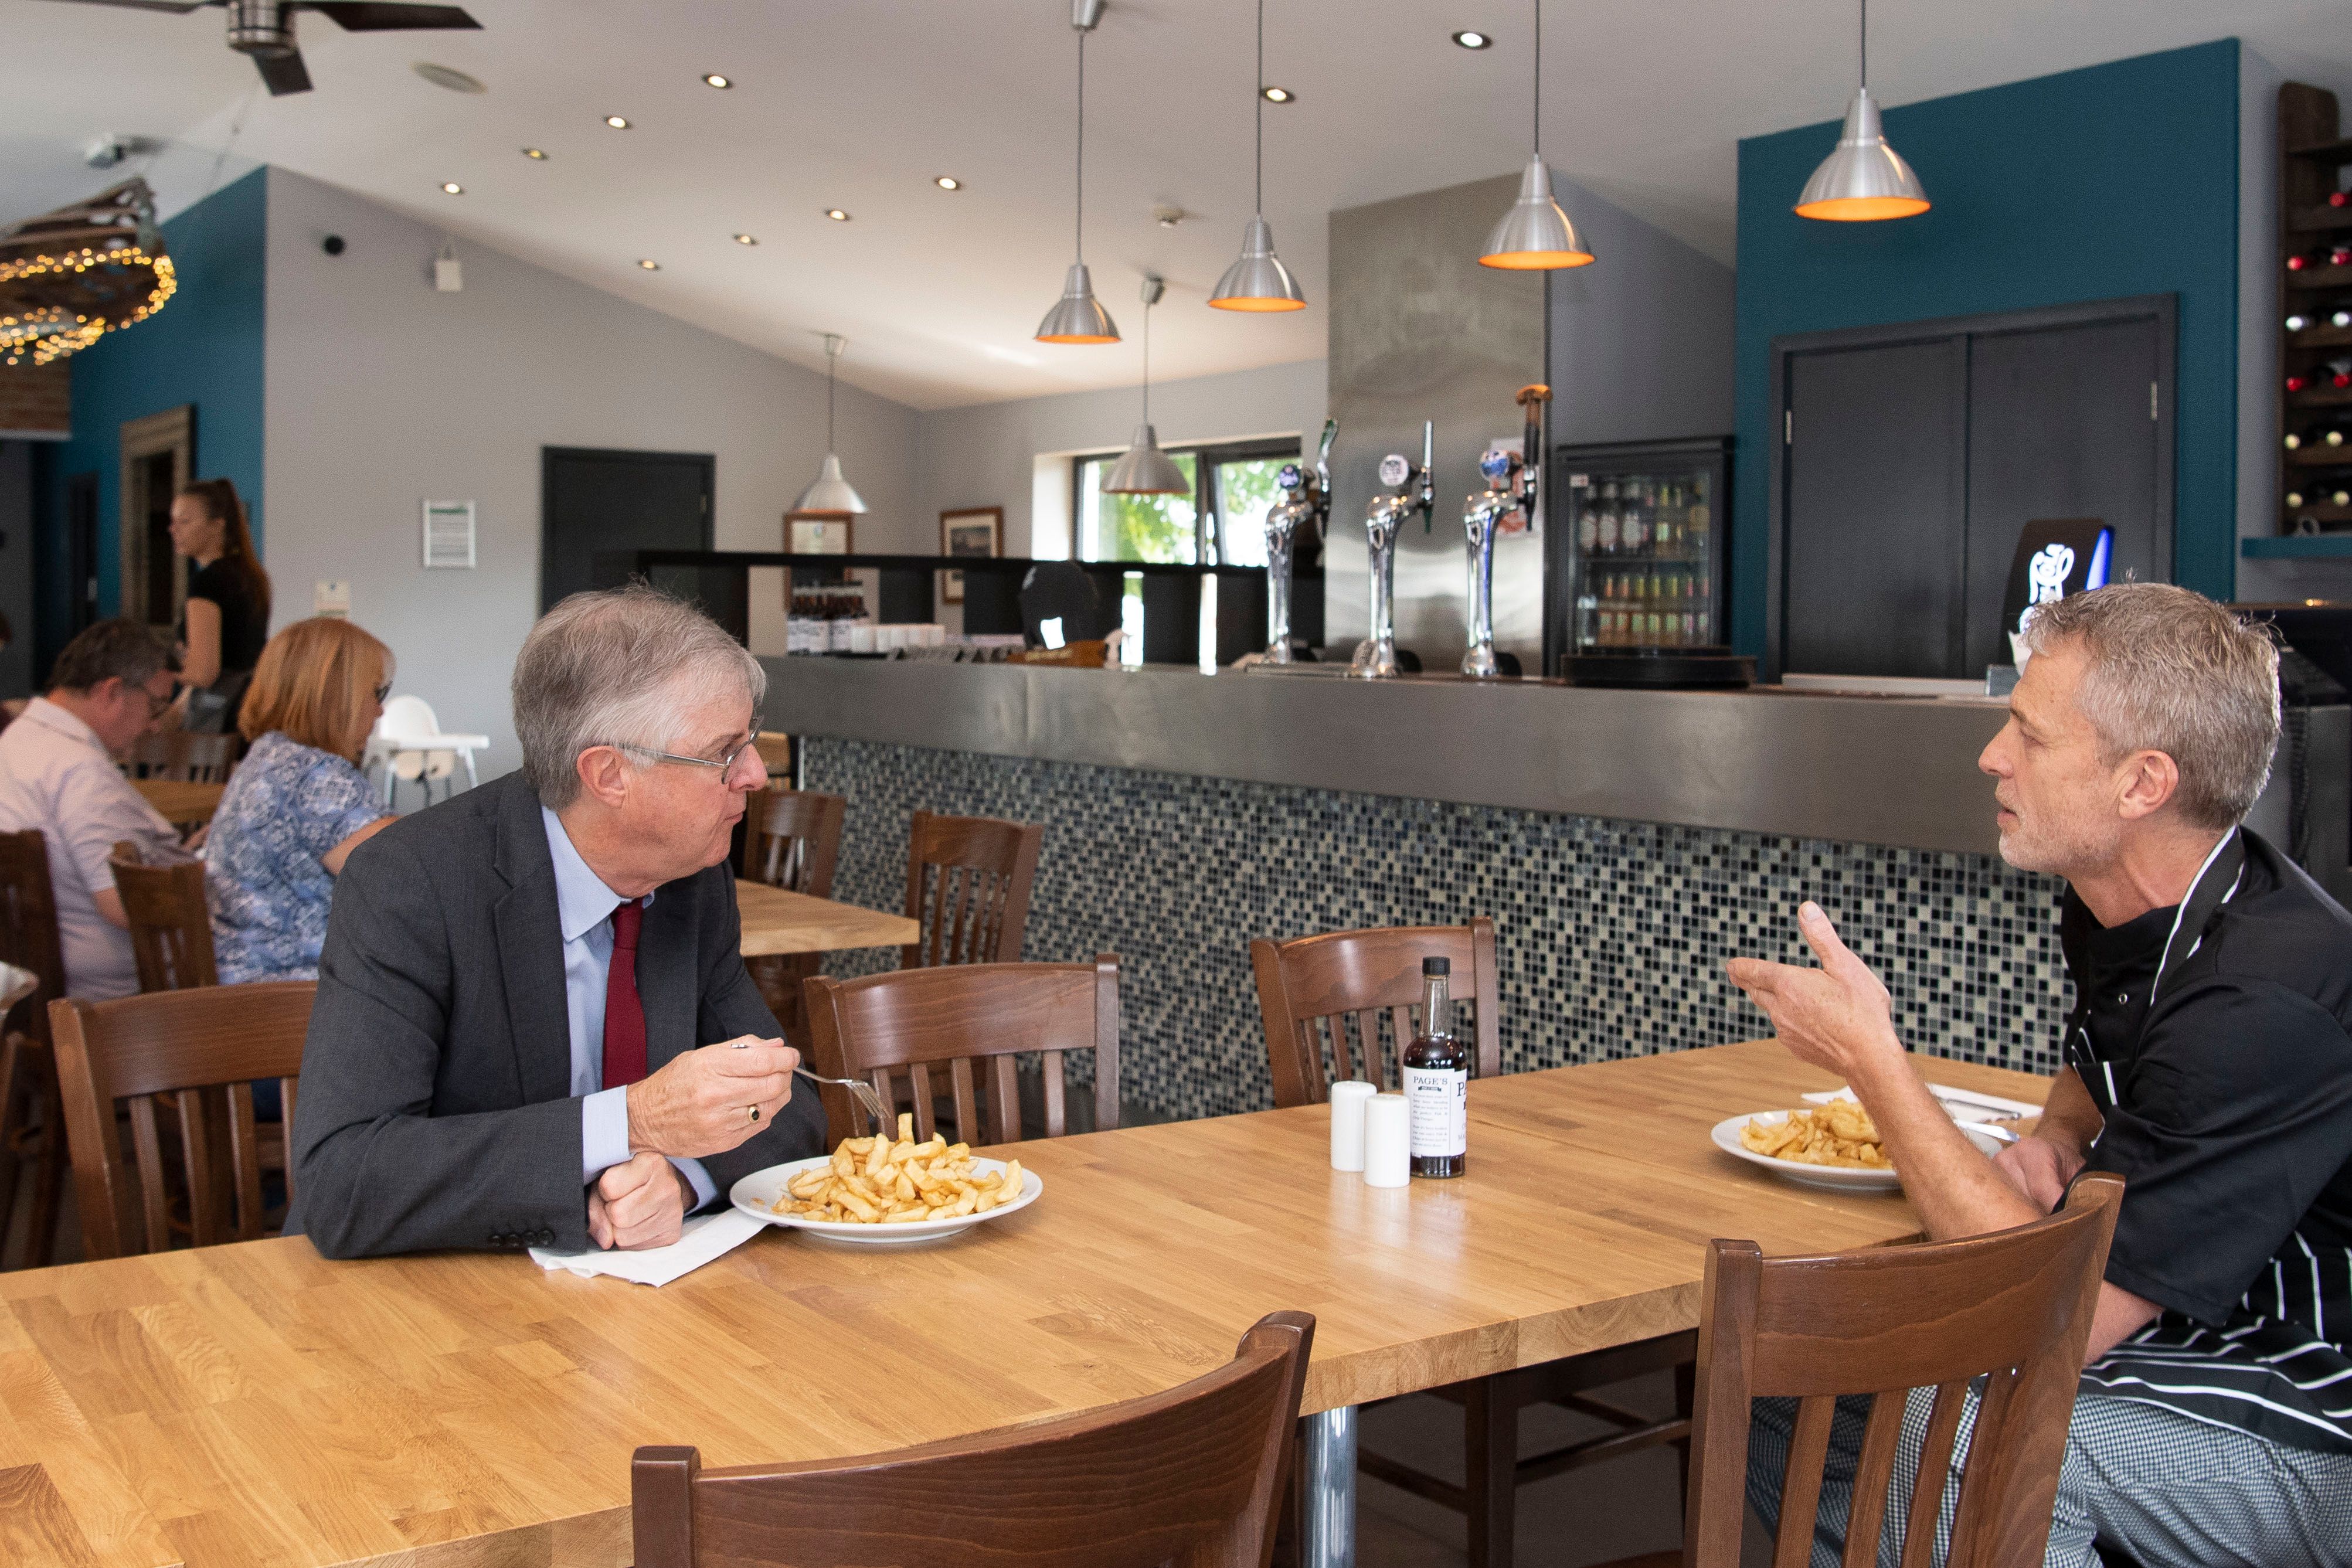 First Minister Mark Drakeford speaks to the owner of Page's Fish and Chips restaurant, John Page